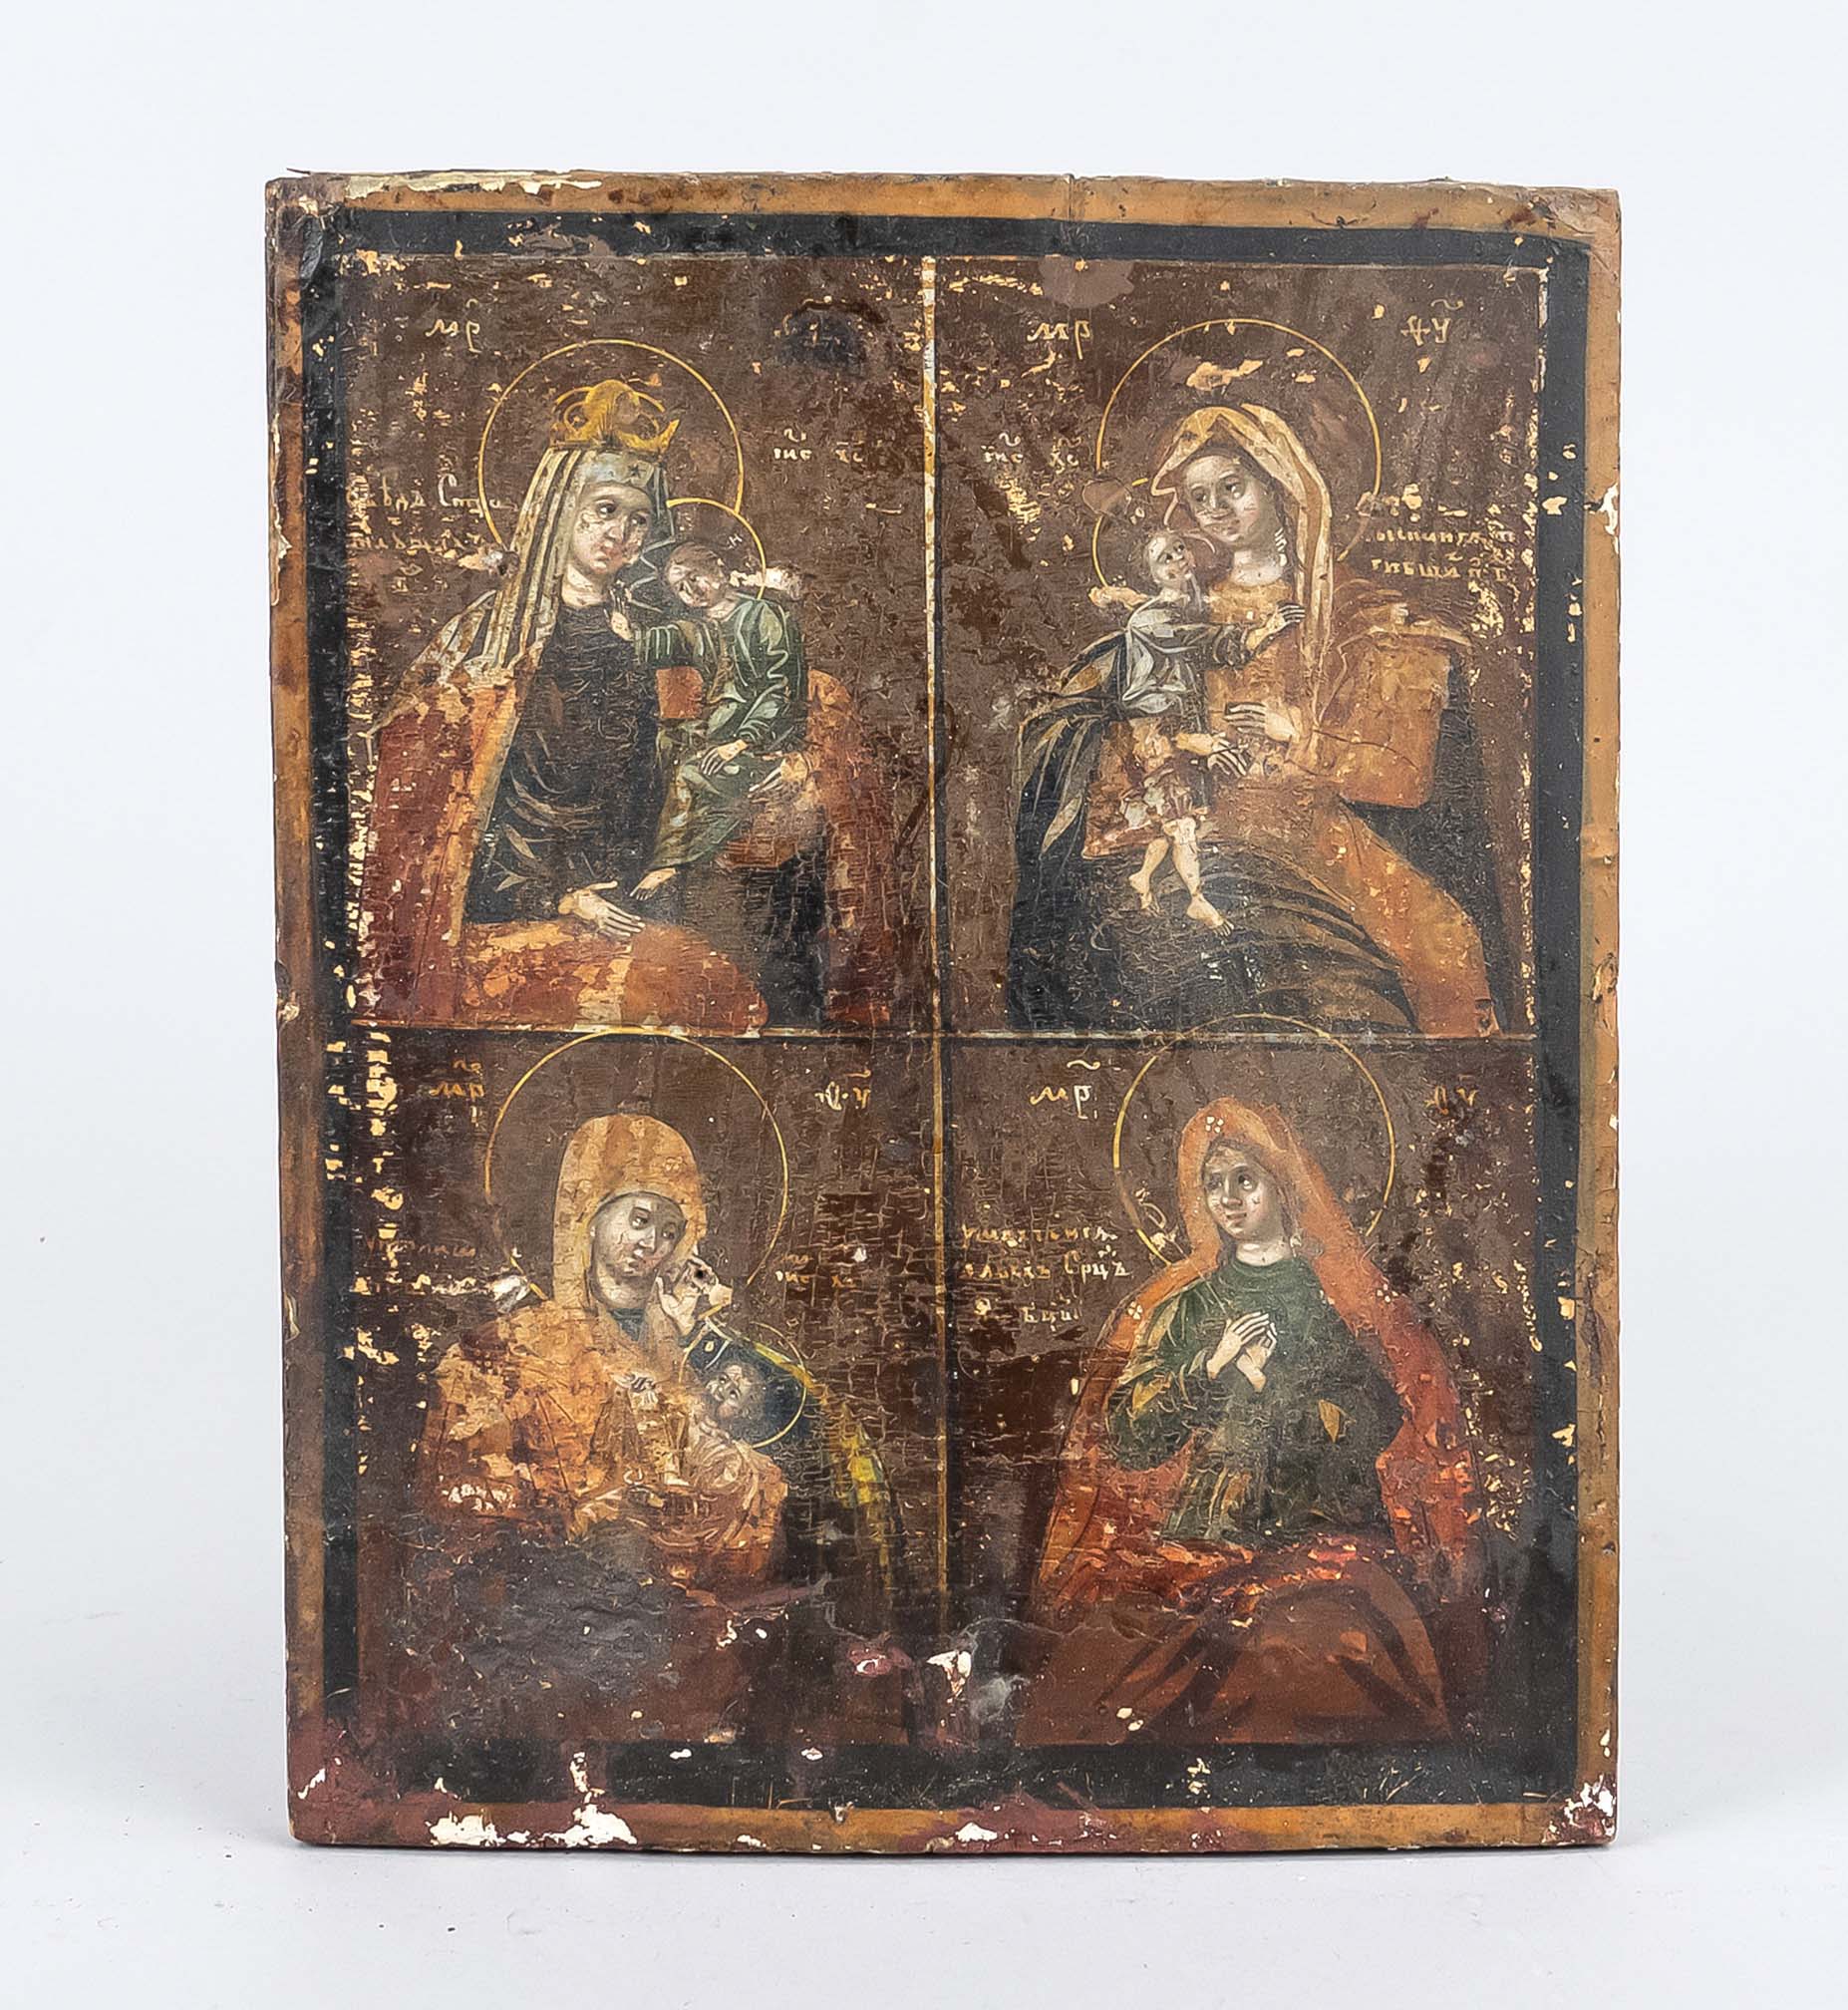 Icon, Russia, 19th c., polychrome tempera painting on chalk ground on wooden panel, oklad with